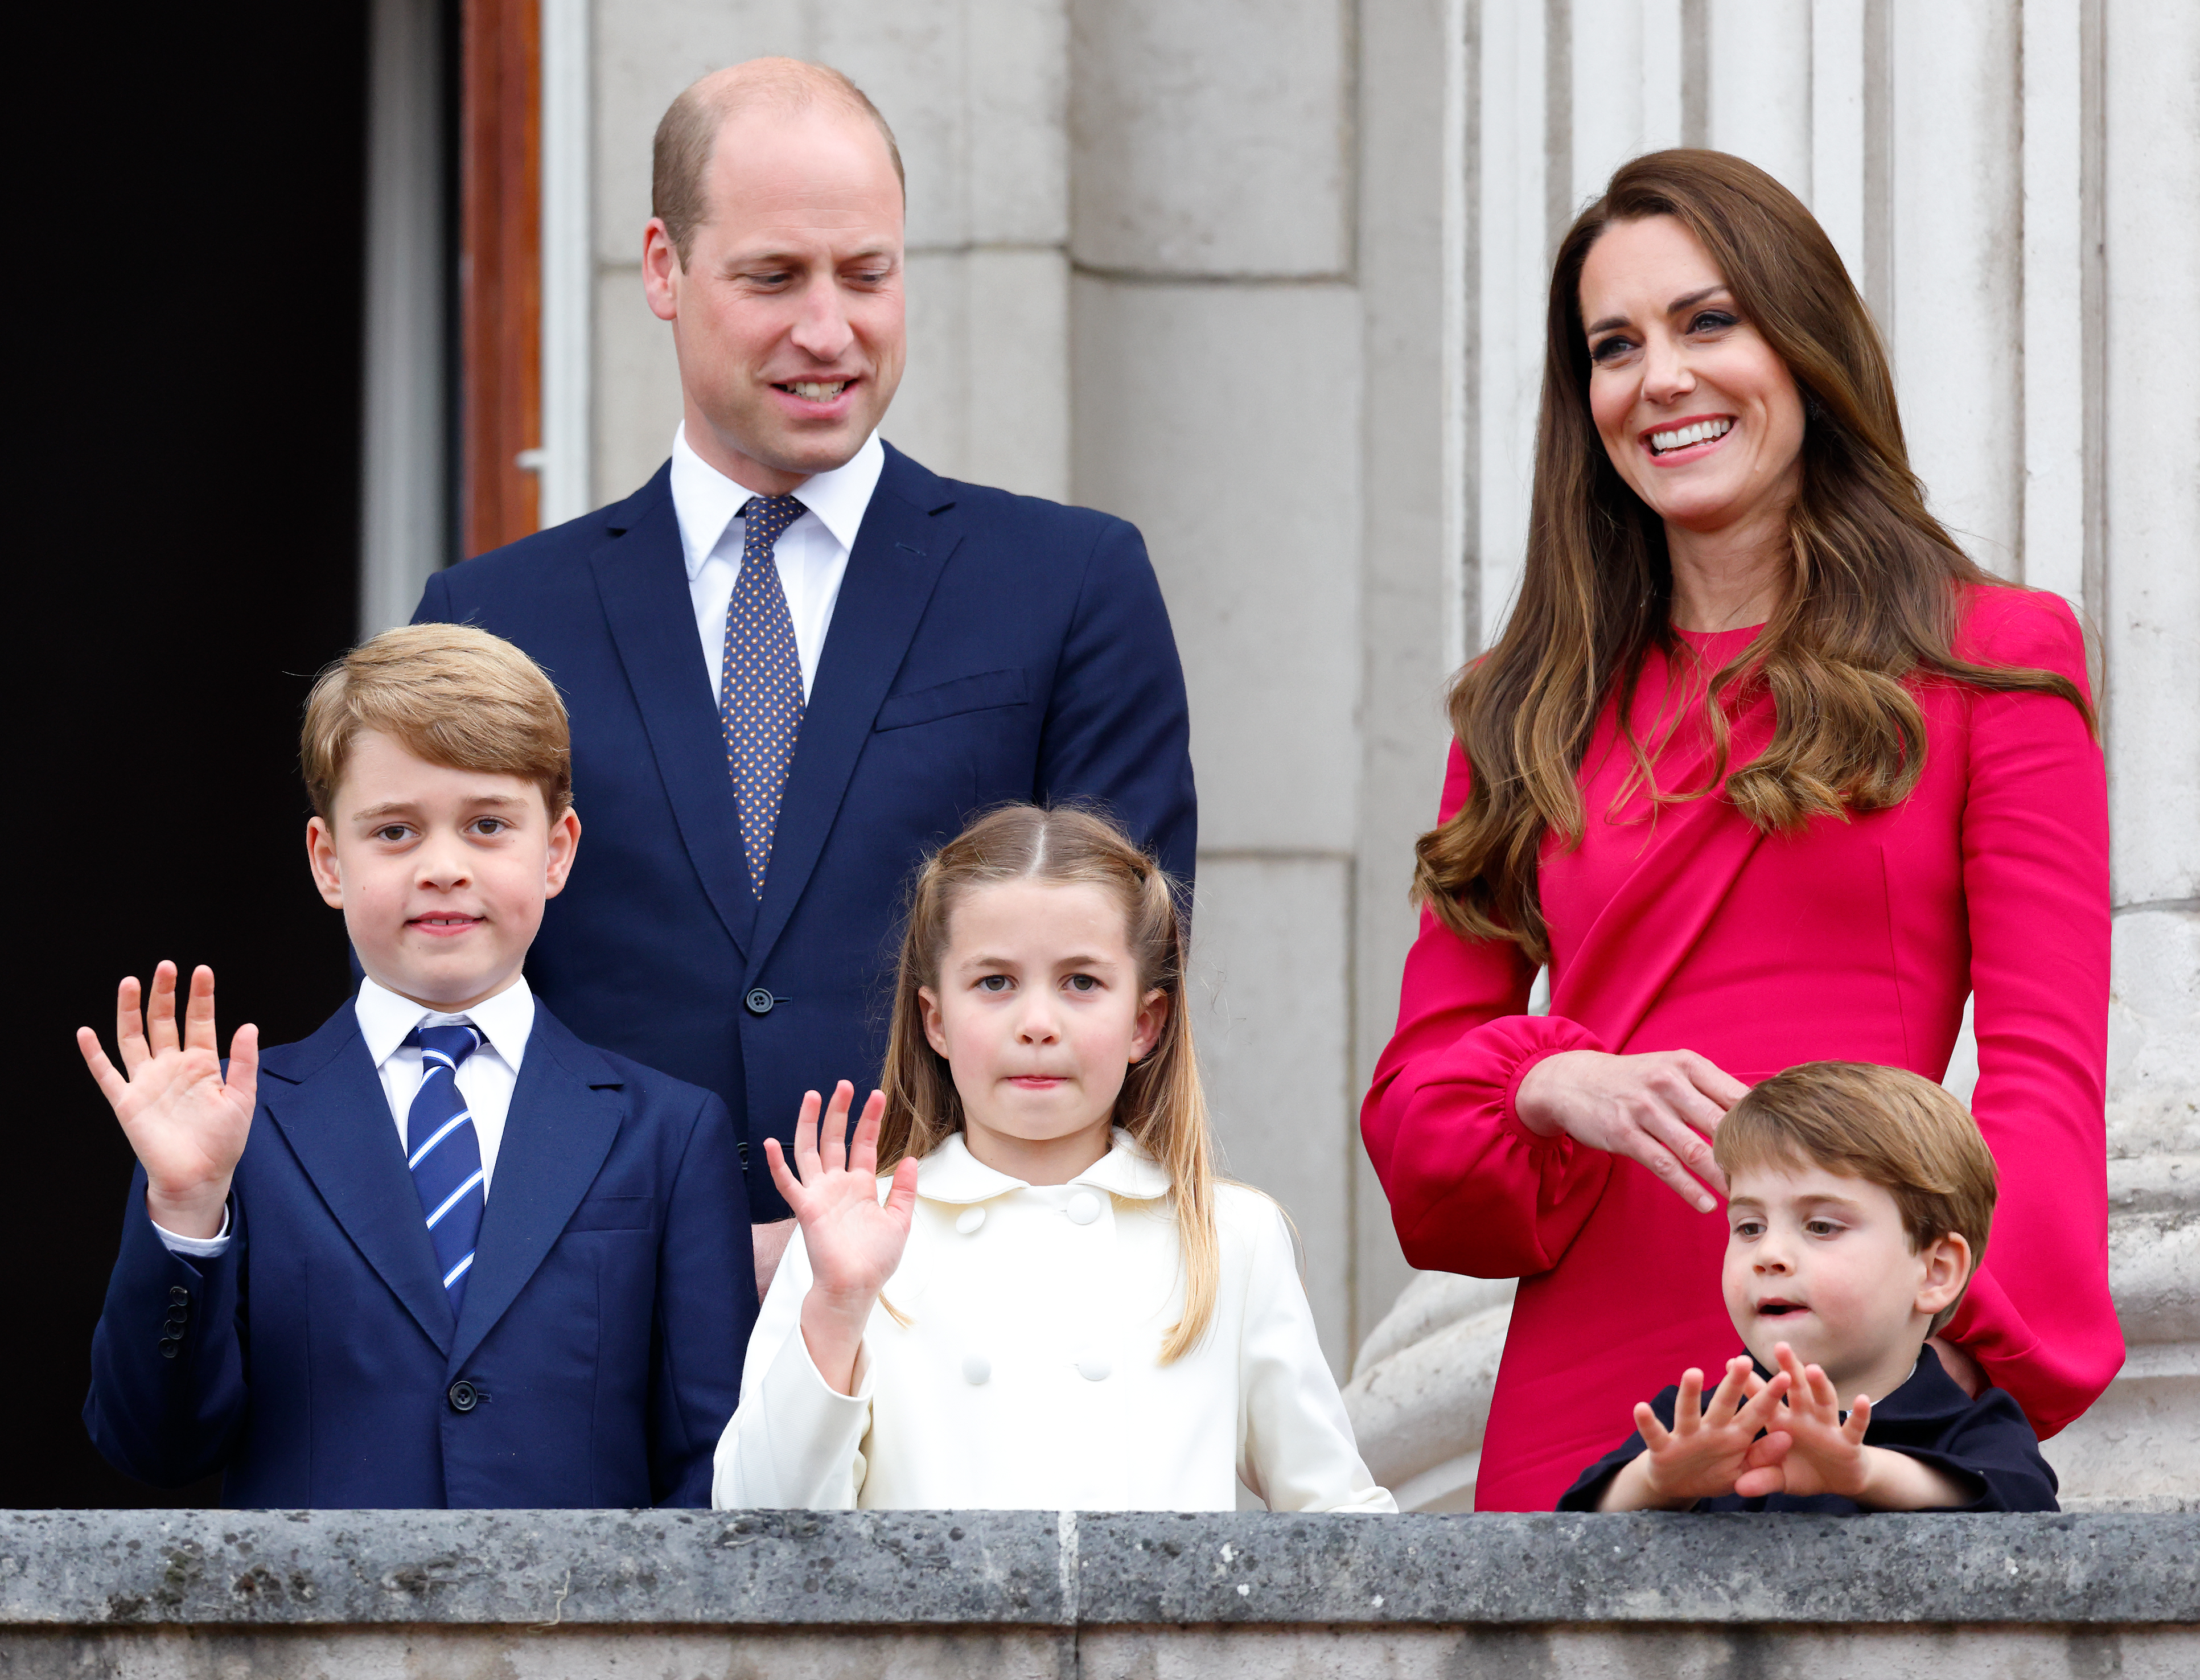 Catherine, Princess of Wales, Prince George, Princess Charlotte, Prince Louis, Prince William, Prince of Wales on the balcony of Buckingham Palace on June 5, 2022 in London, England | Source: Getty Images